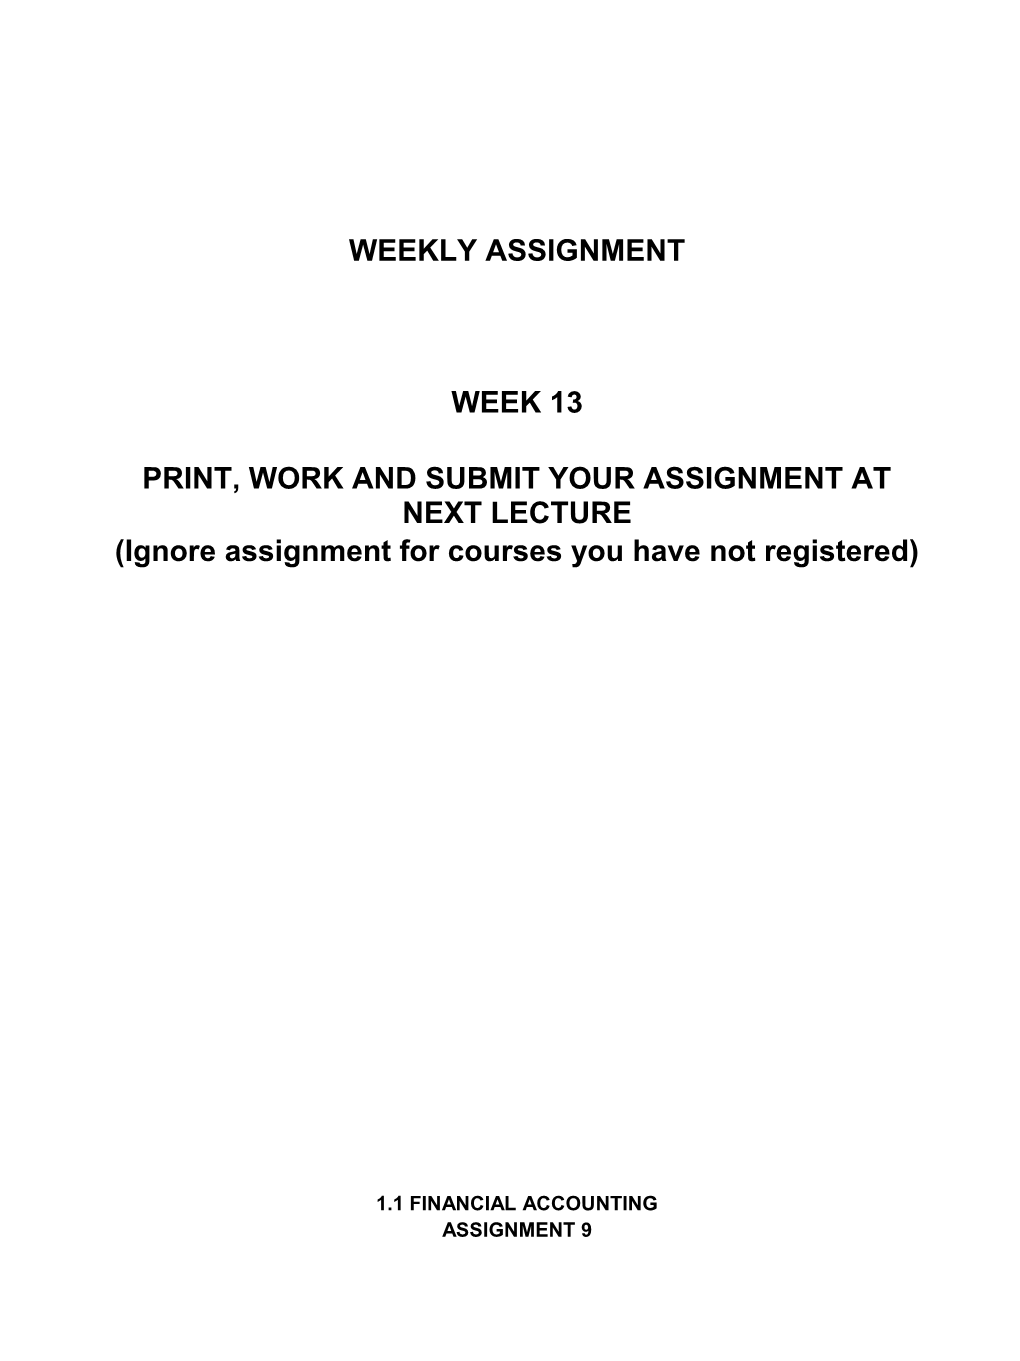 Print, Work and Submit Your Assignment at Next Lecture